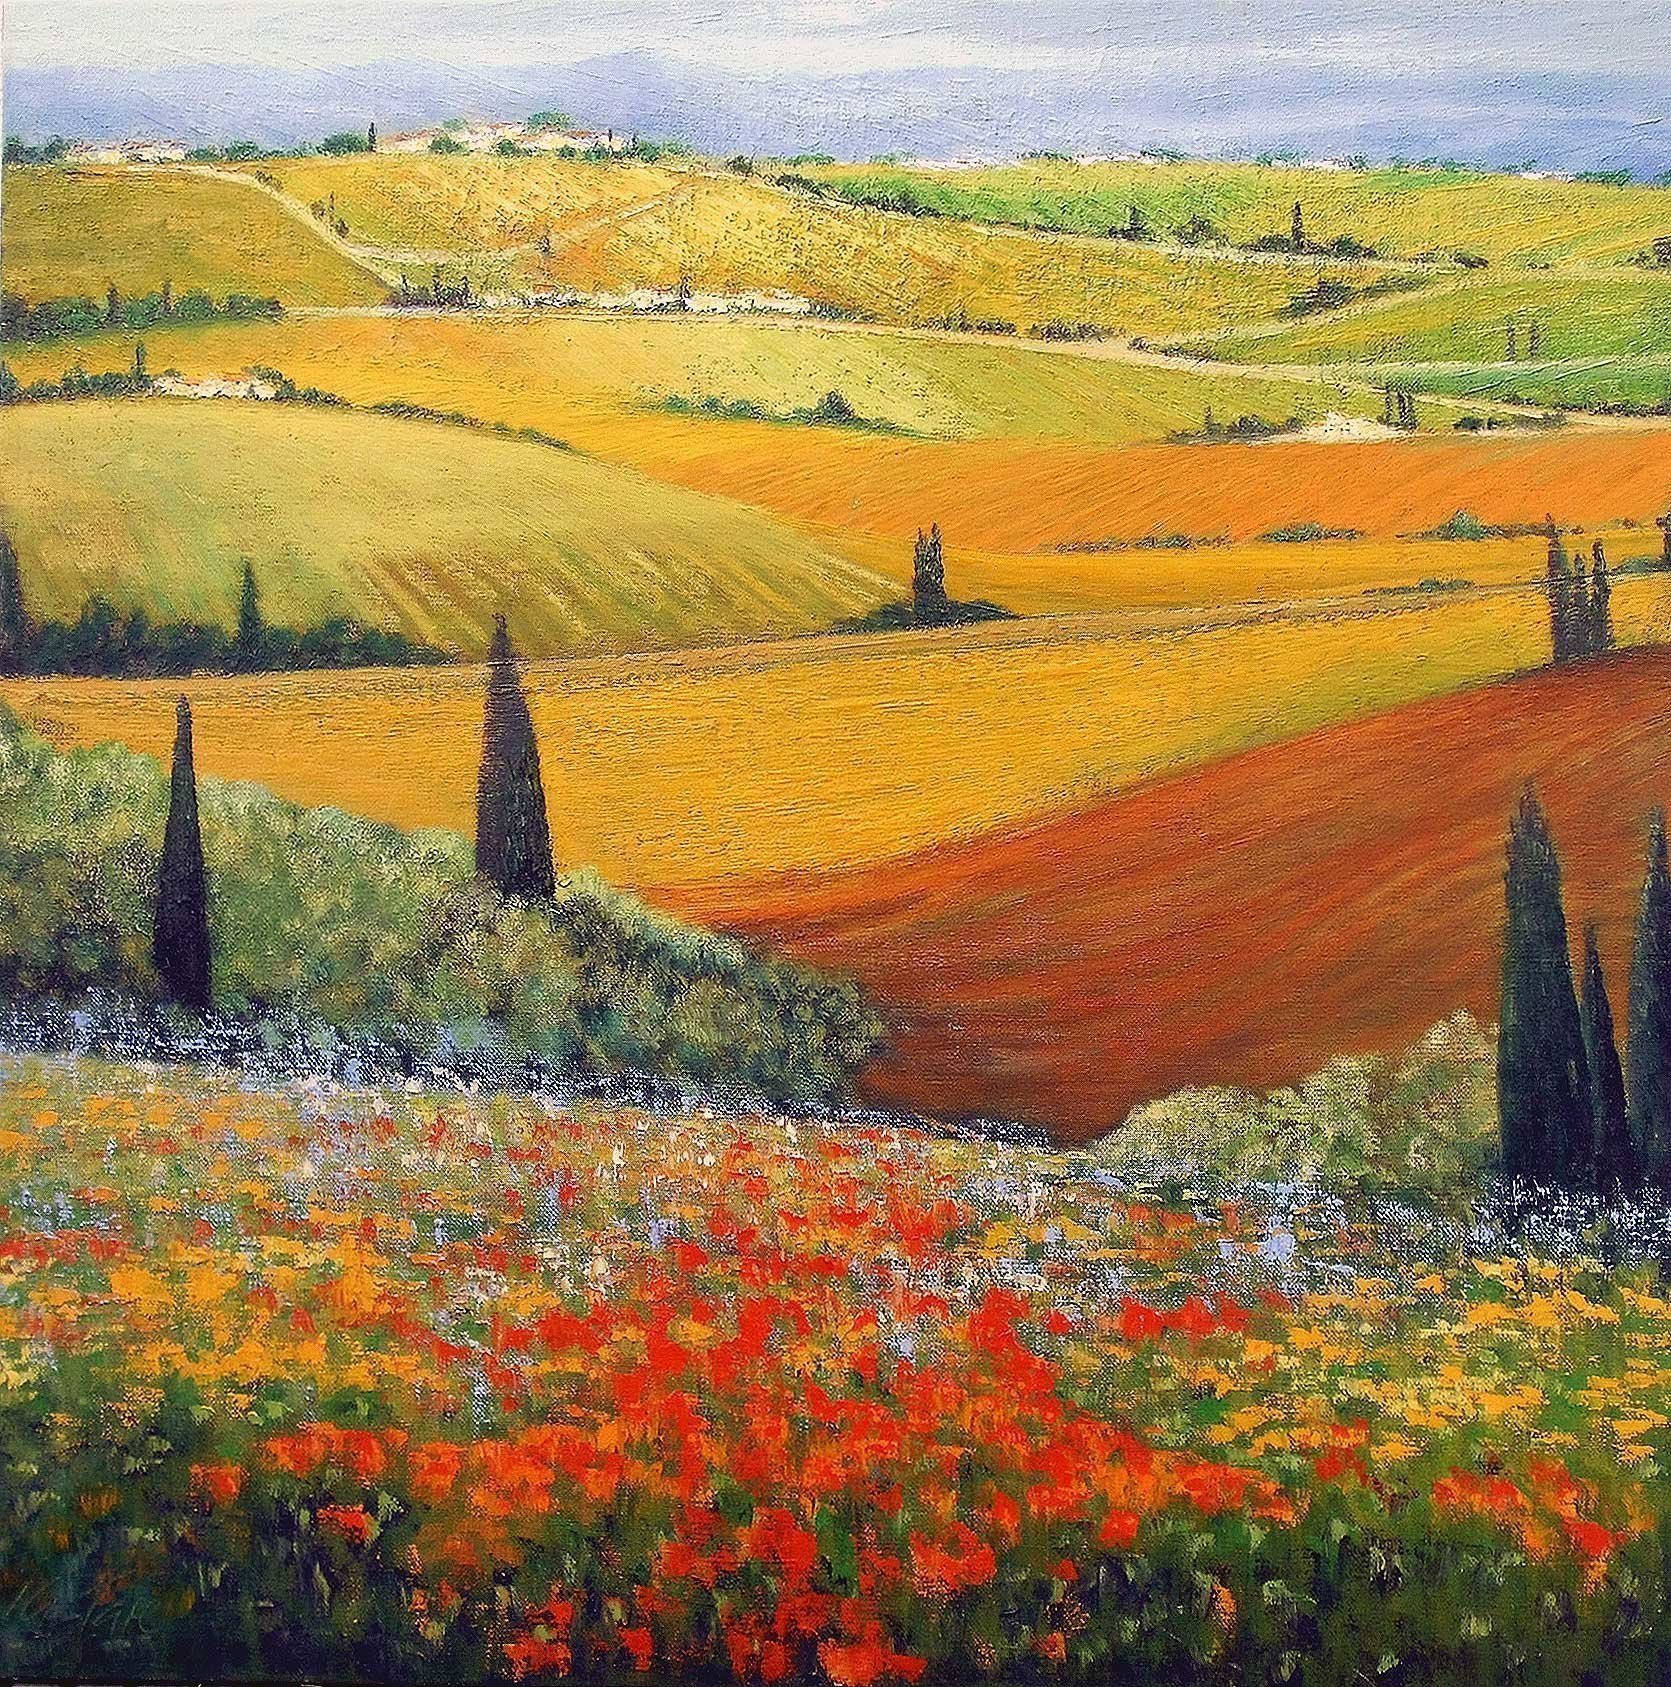 Isidro Cistare; En El Corazon De La Toscana, 2003, Original Painting Oil, 130 x 130 cm. Artwork description: 241  Oil Painting, Original Signed, Oil painting with a lot of material contribution, through spatula and details with thick brush.  It represents the fields of Italian Tuscany, .  with his colorful and classic perspective of the painter which makes him have a very special calligraphy, RG...